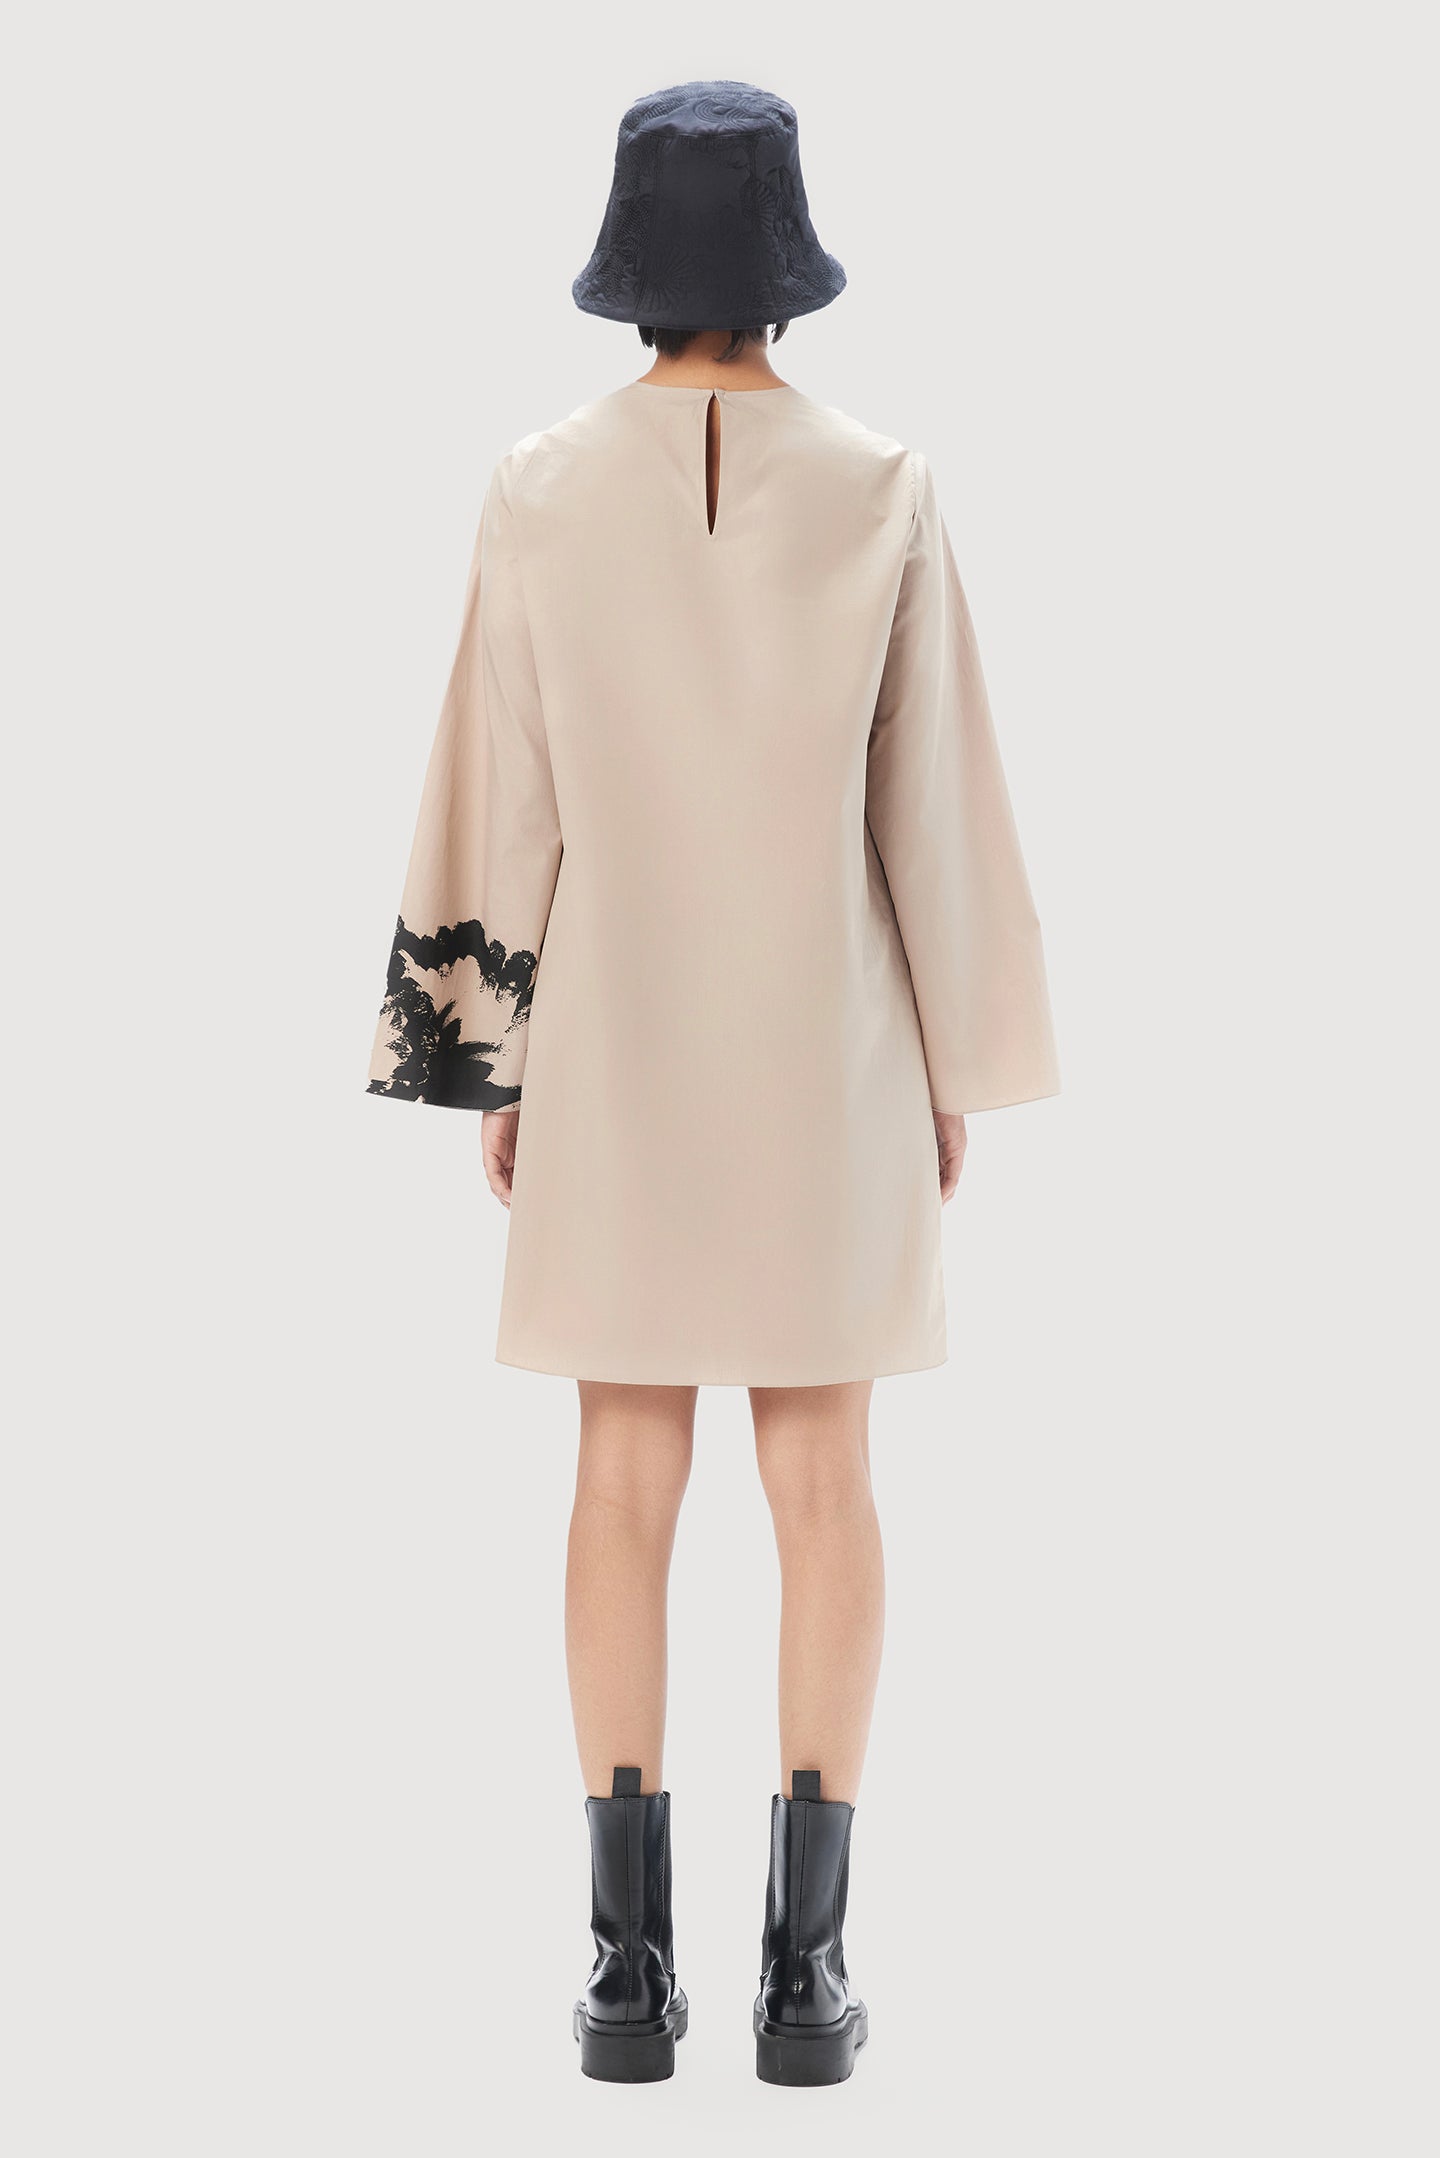 A-Line Oval Neck Dress with Bell Sleeves